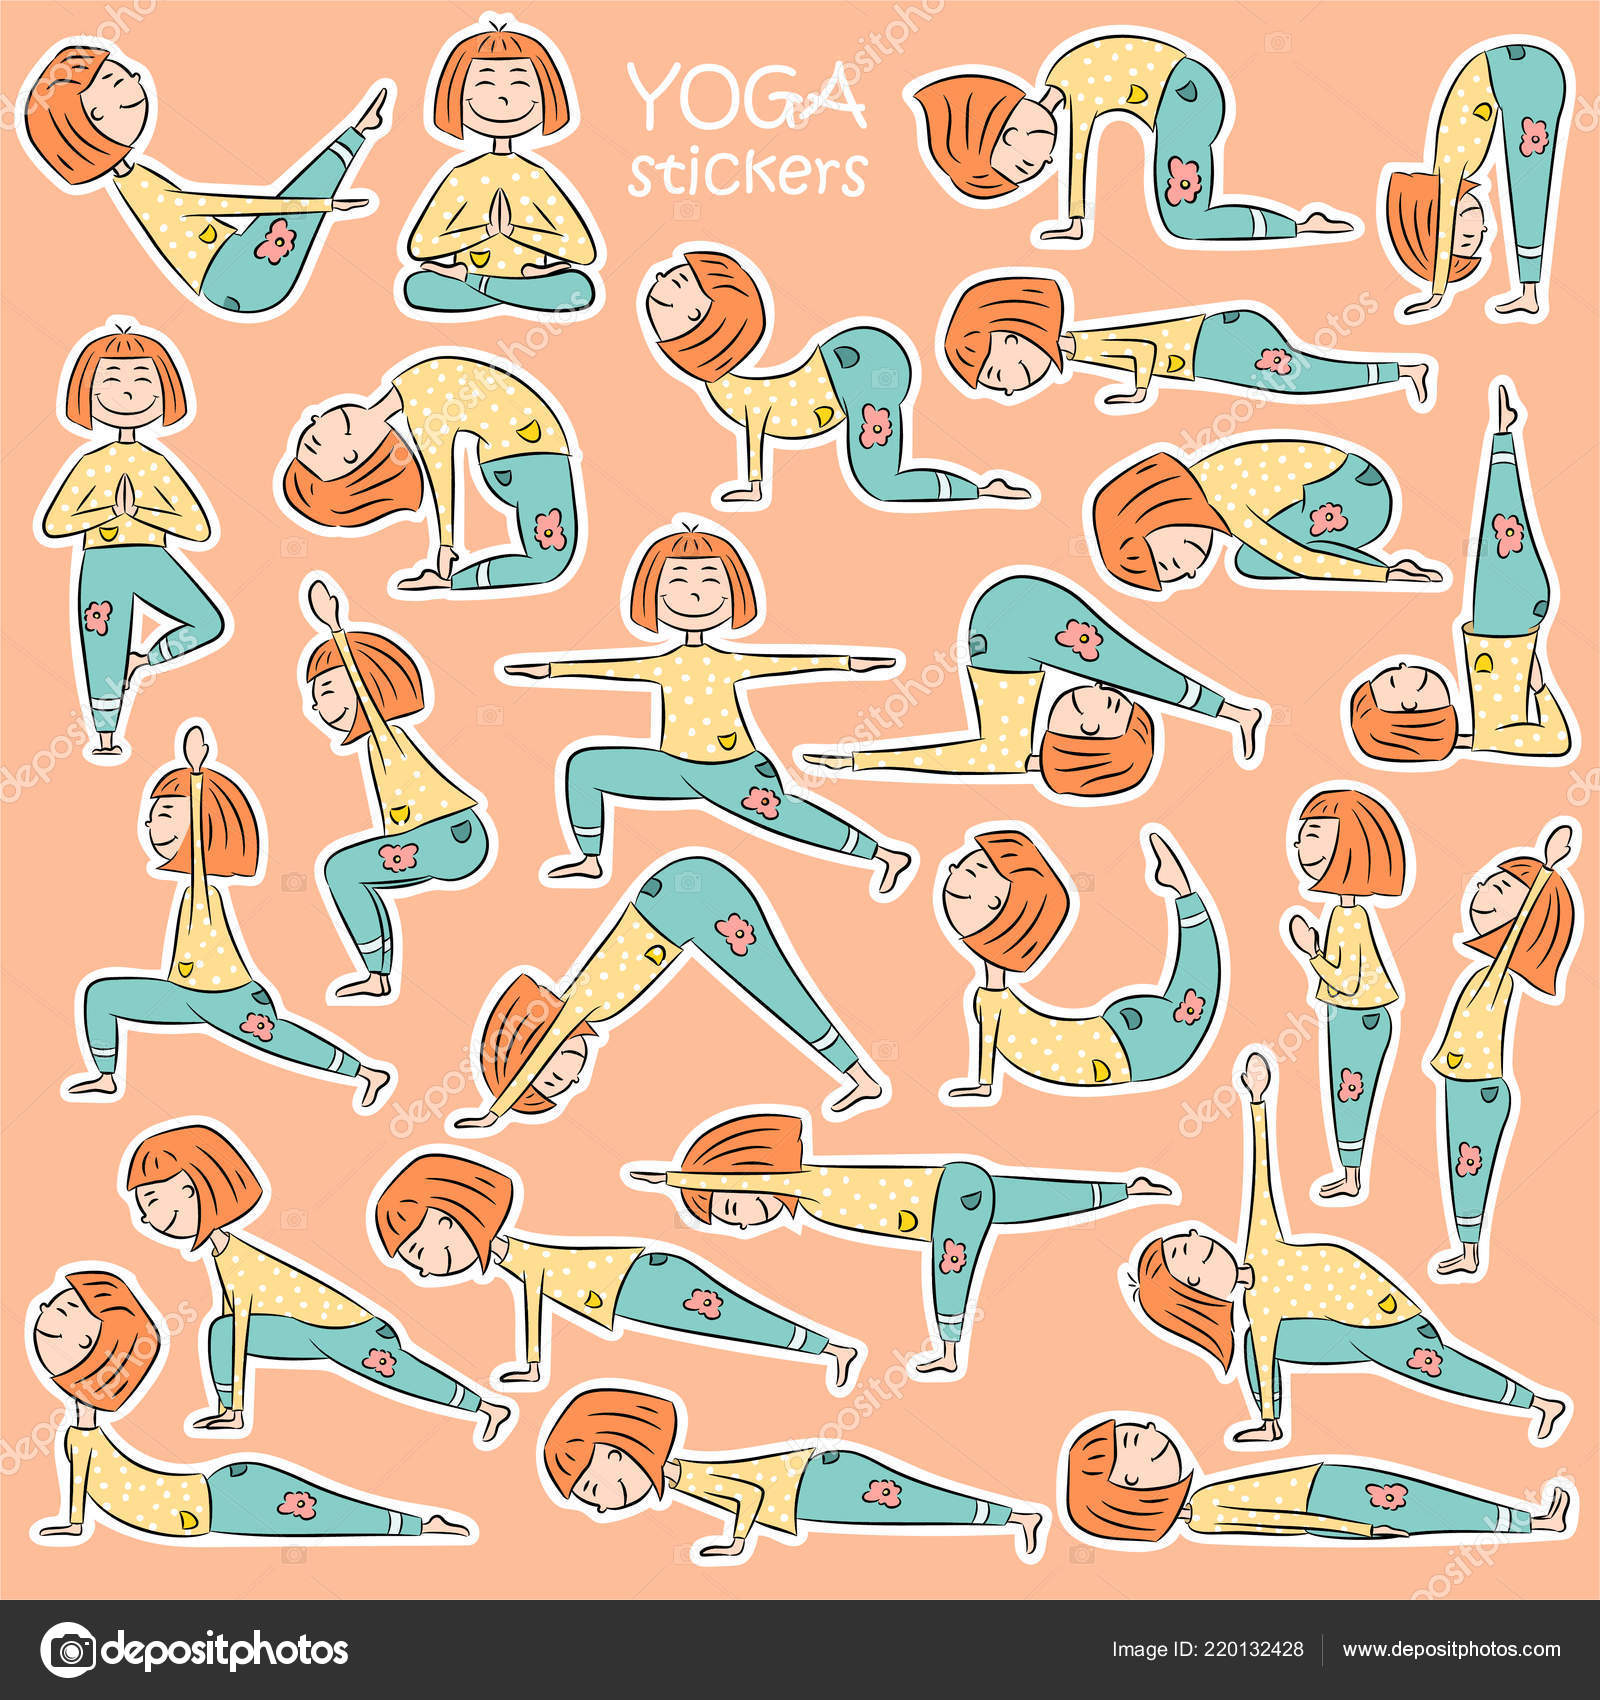 Kids Yoga Sticker Set Cute Cartoon Girl Different Yoga Poses Stock Vector  by ©yanabolbot.gmail.com 220132428